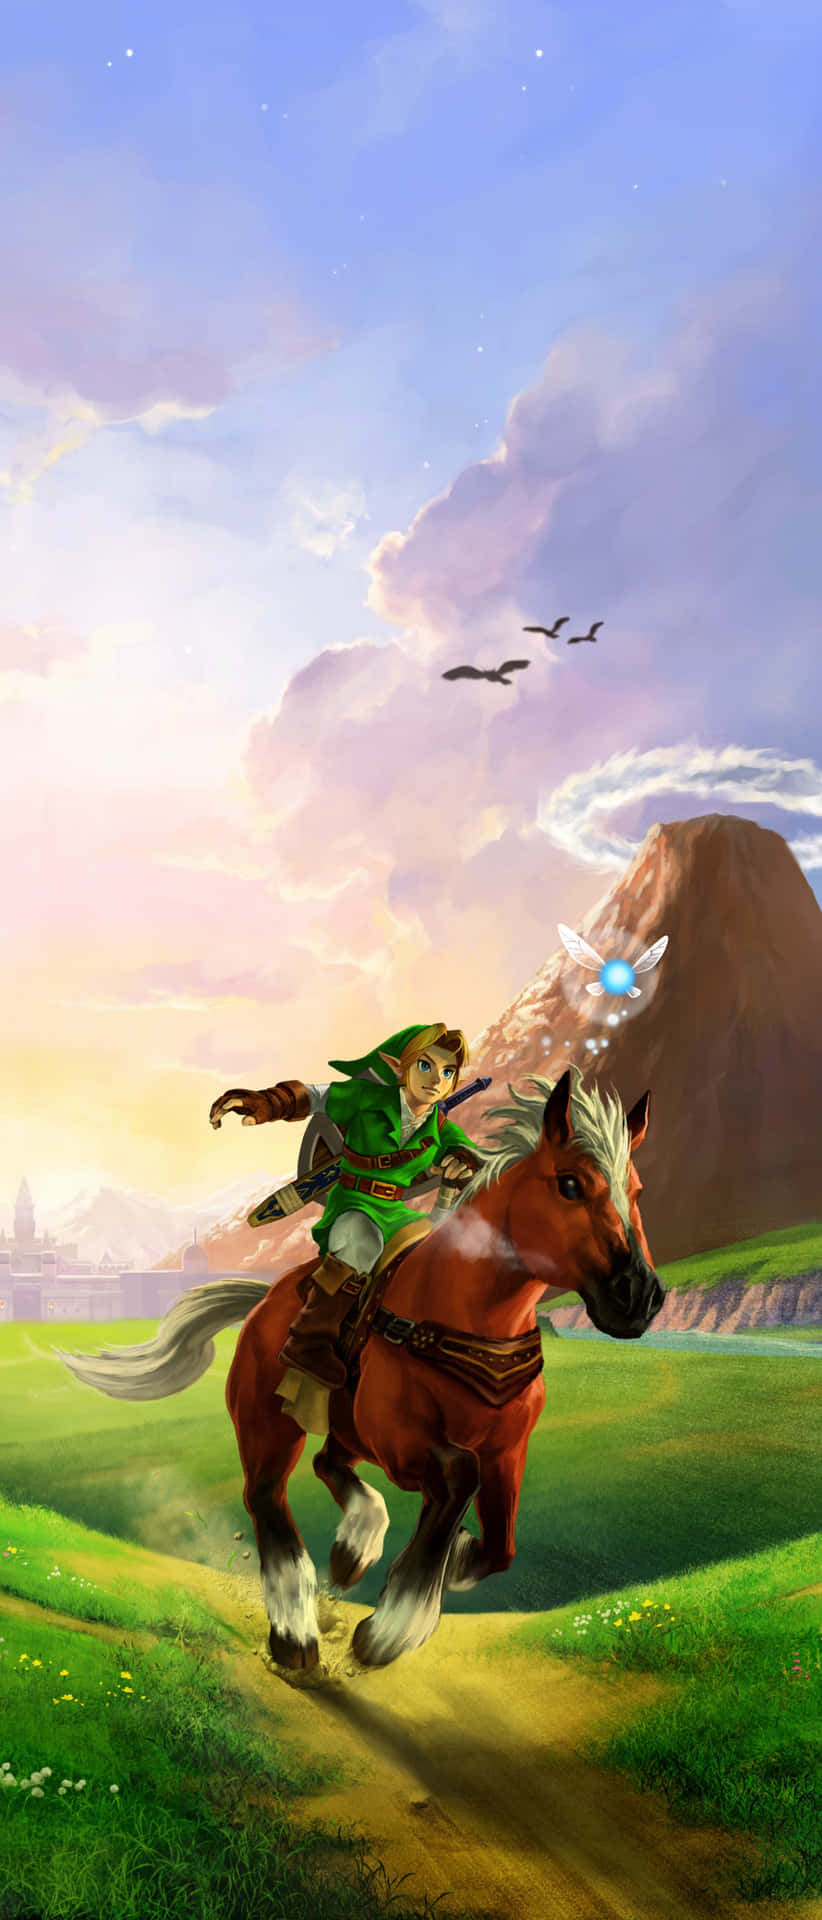 Uncover the secrets of The Legend of Zelda with the new Zelda Phone! Wallpaper